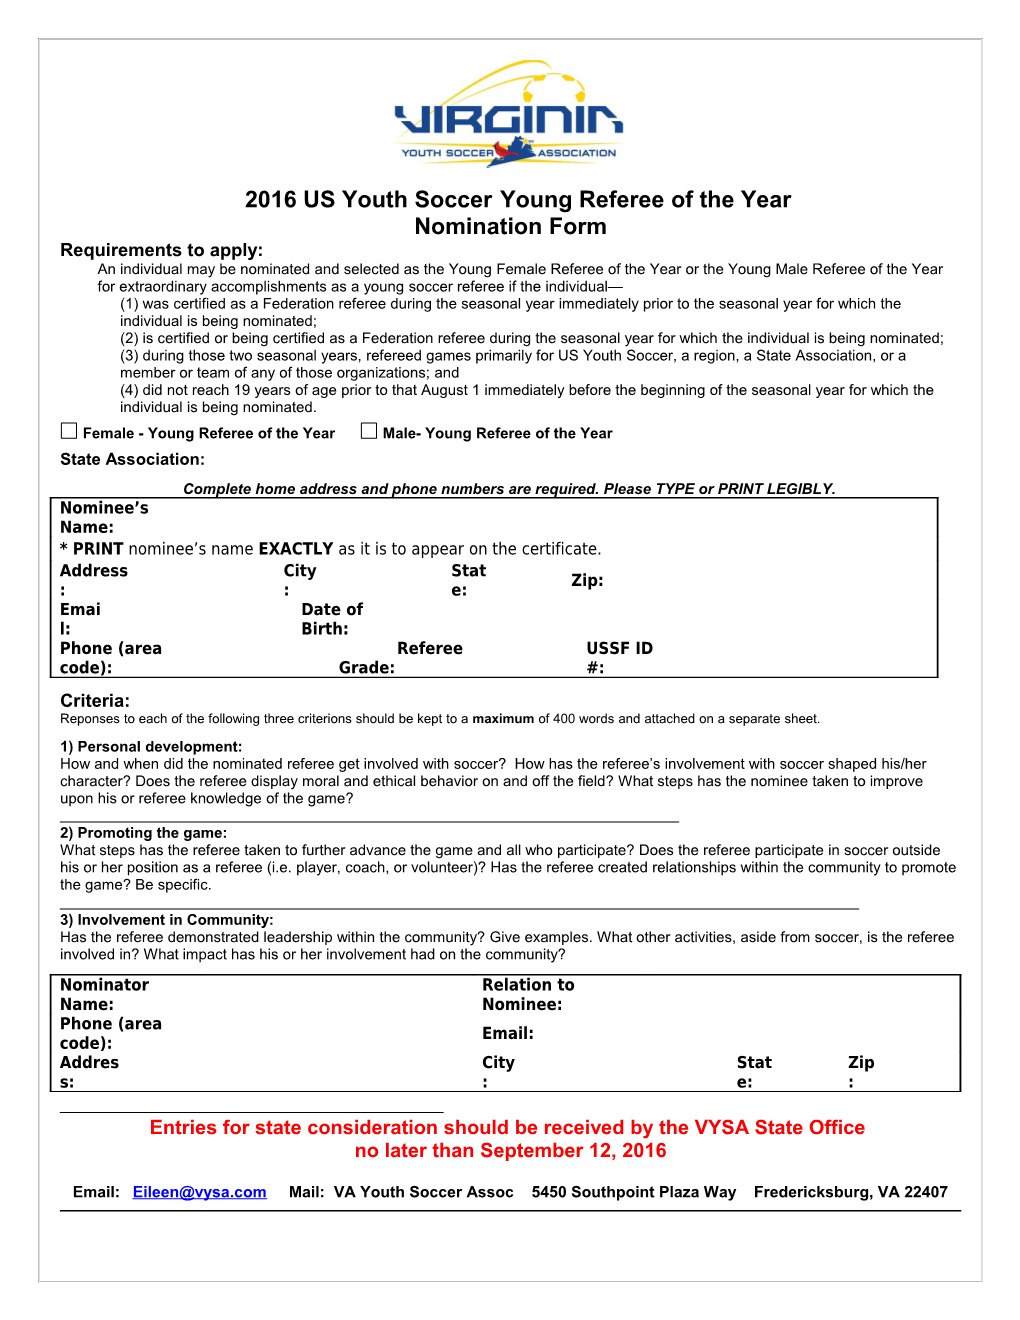 2016 US Youth Soccer Young Referee of the Year